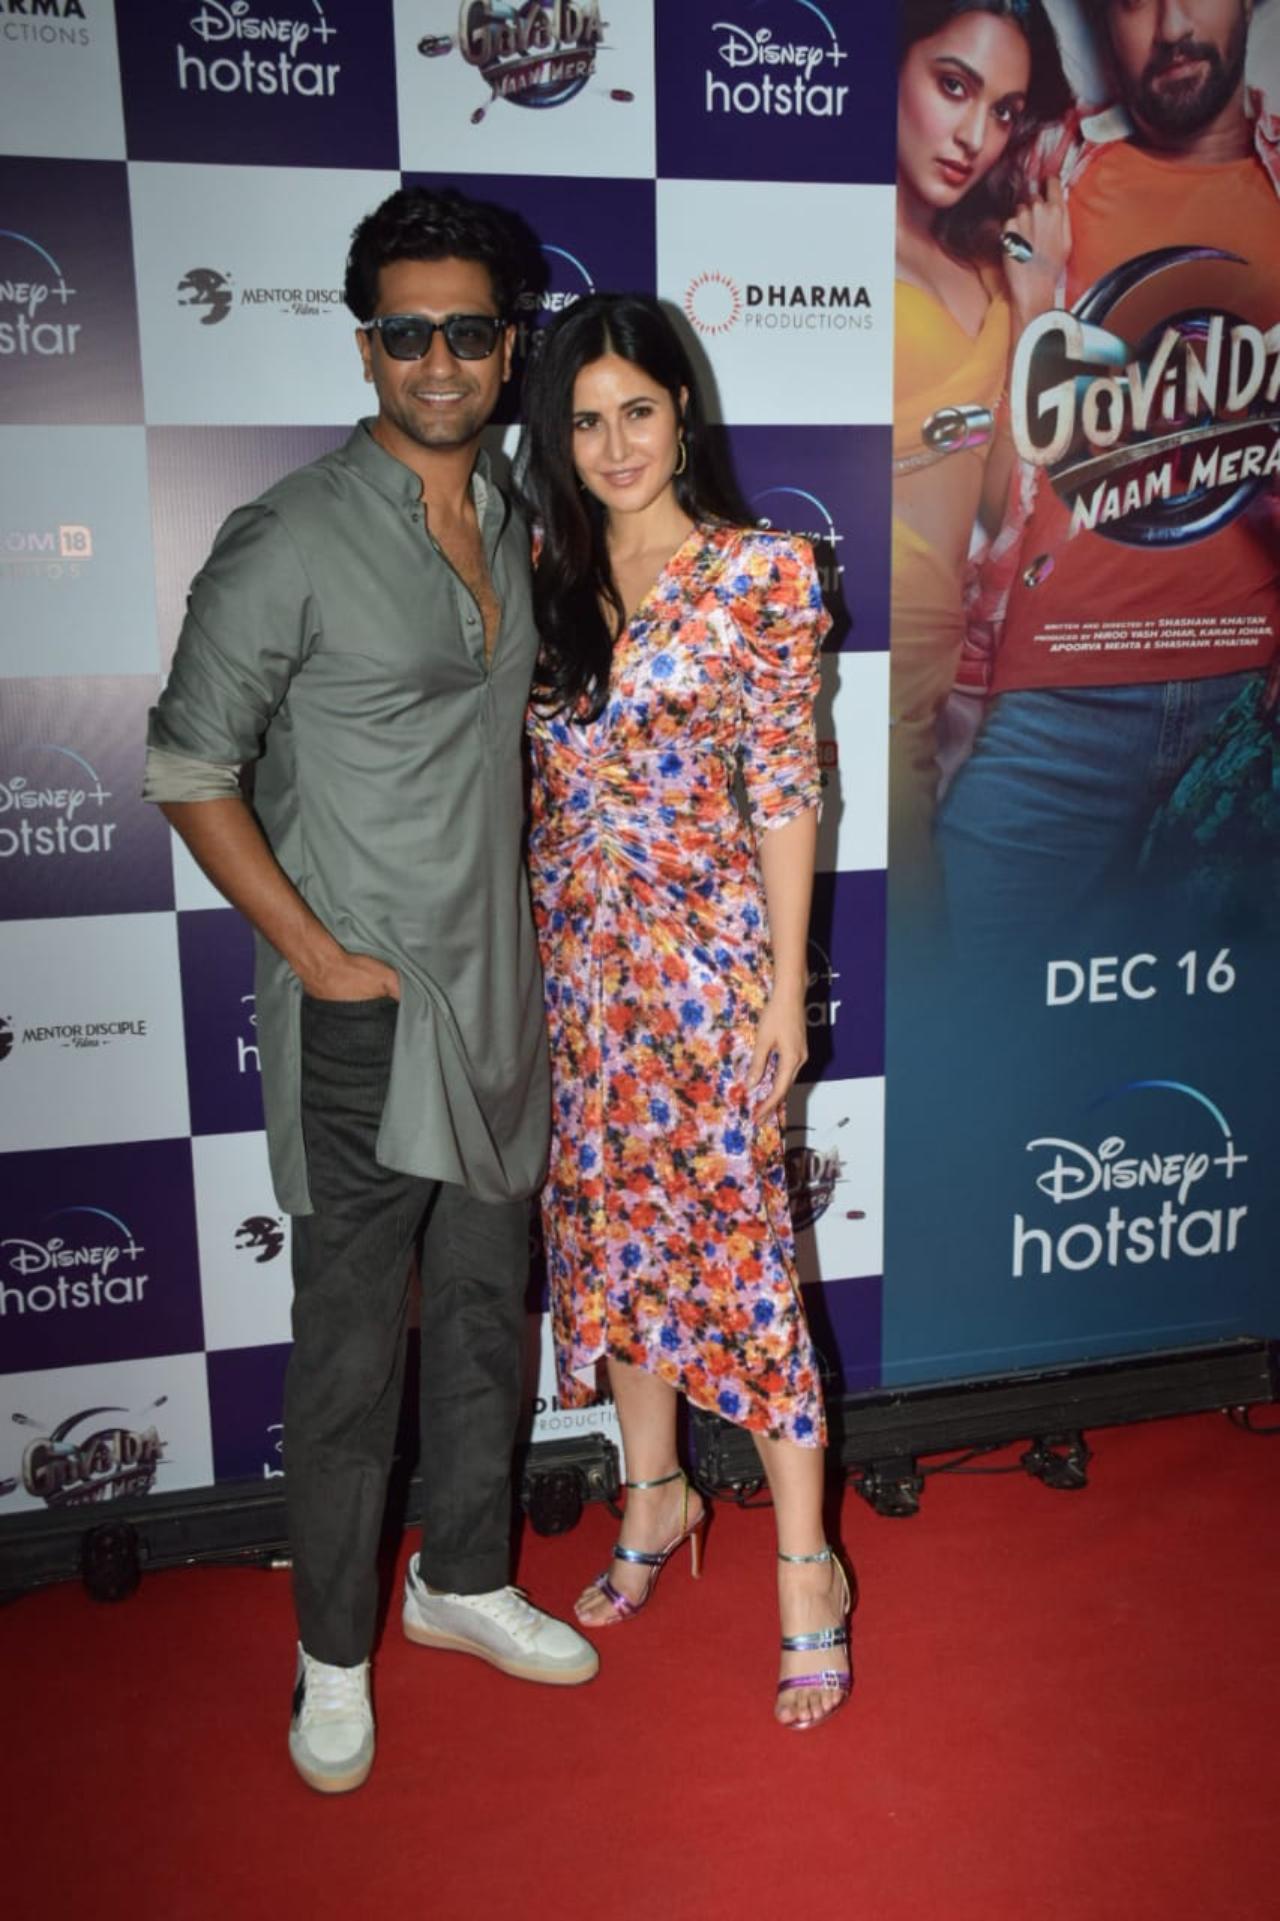 Vicky Kaushal and Katrina Kaif completed a year of marriage last week. They were spotted together at the screening of Vicky's latest offering, Govinda Naam Mera